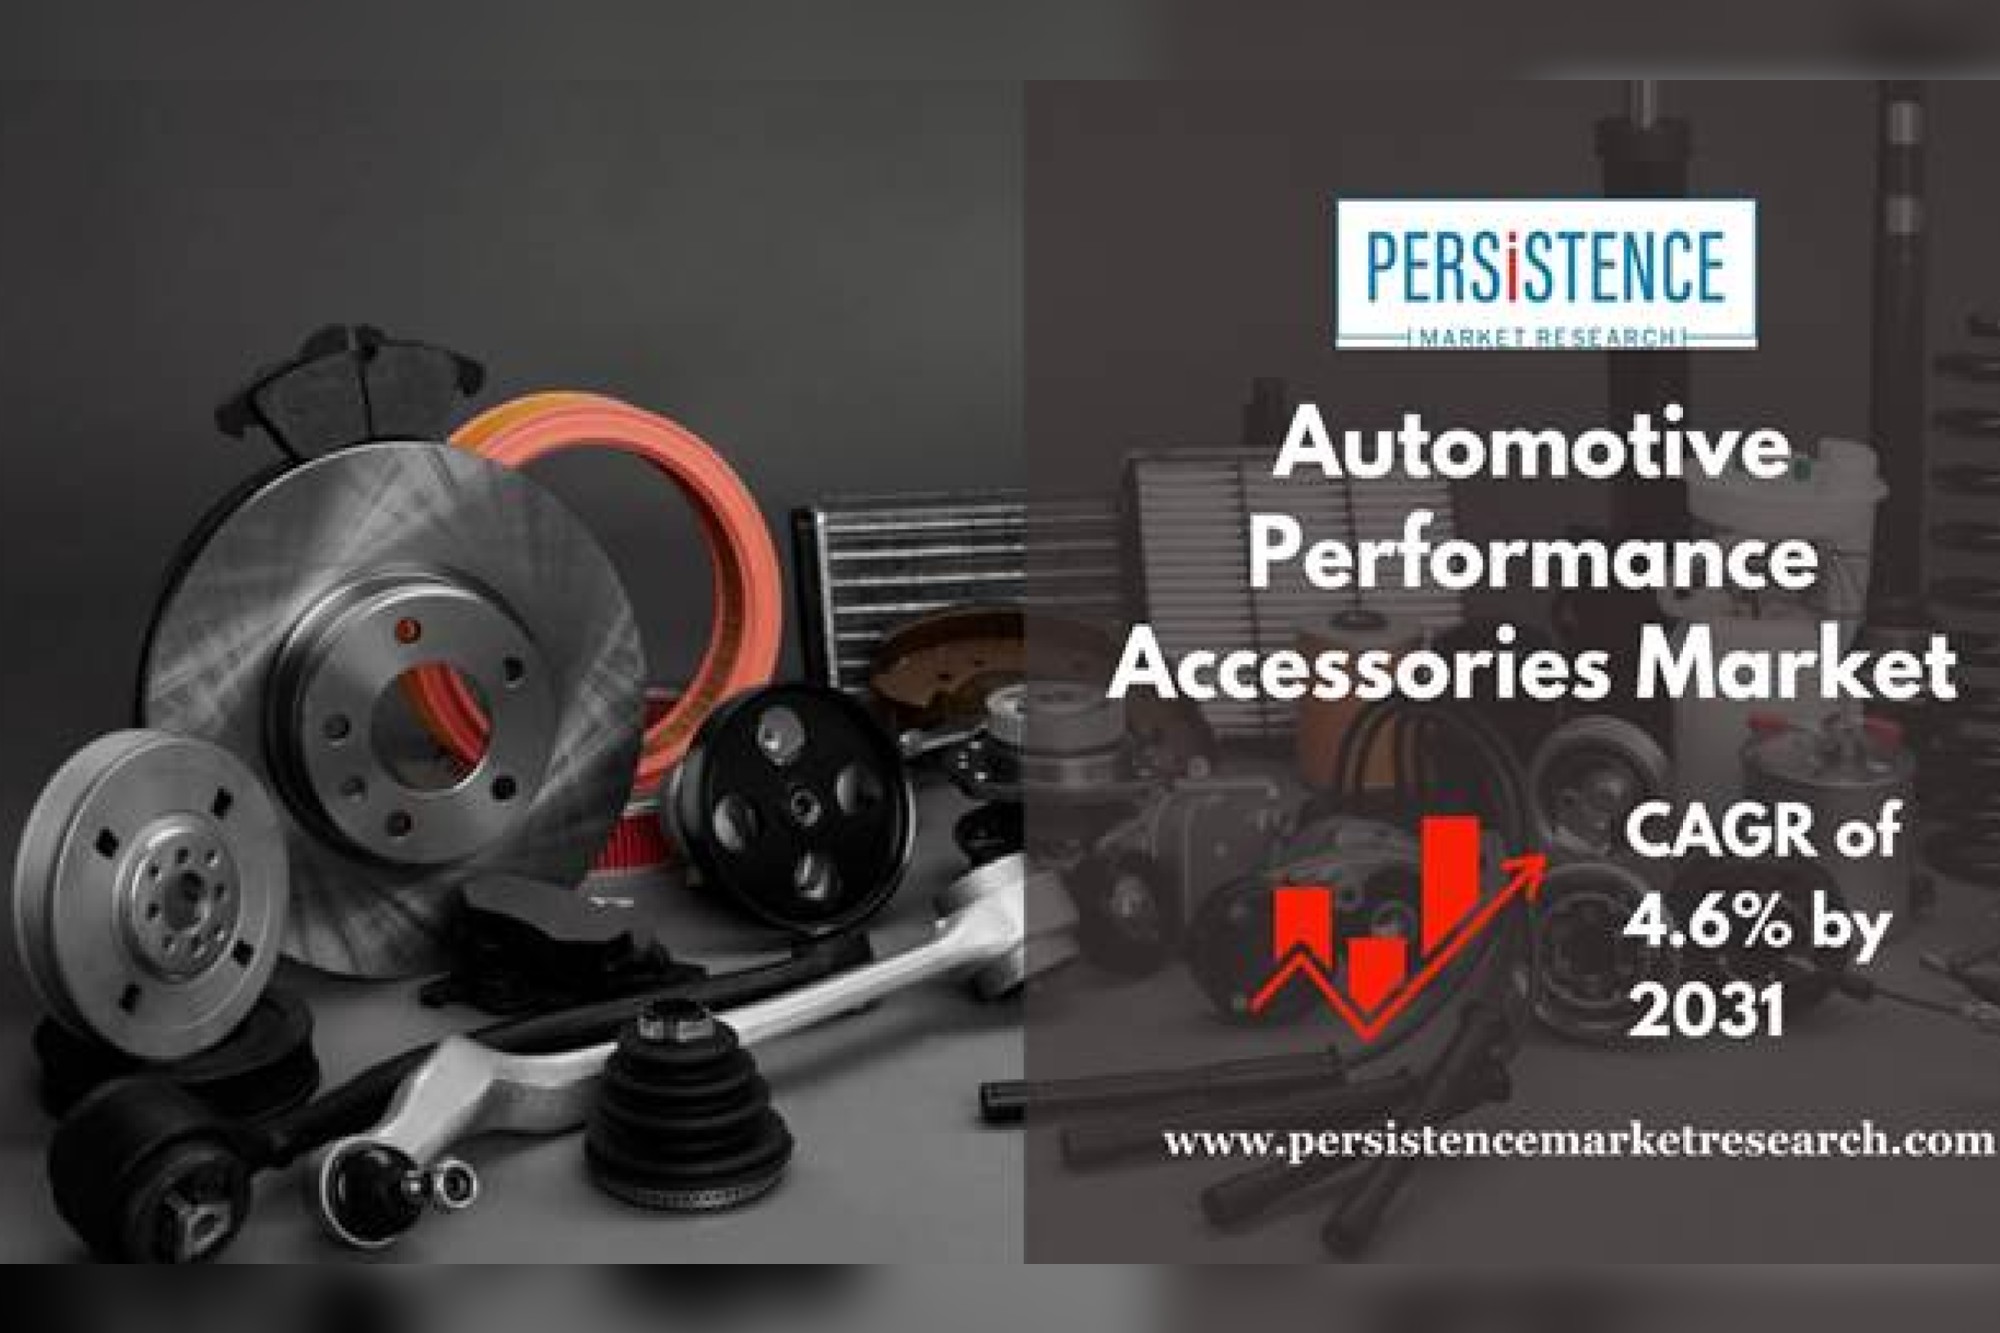 Auto performance accessories market to reach $494.8 million by 2031